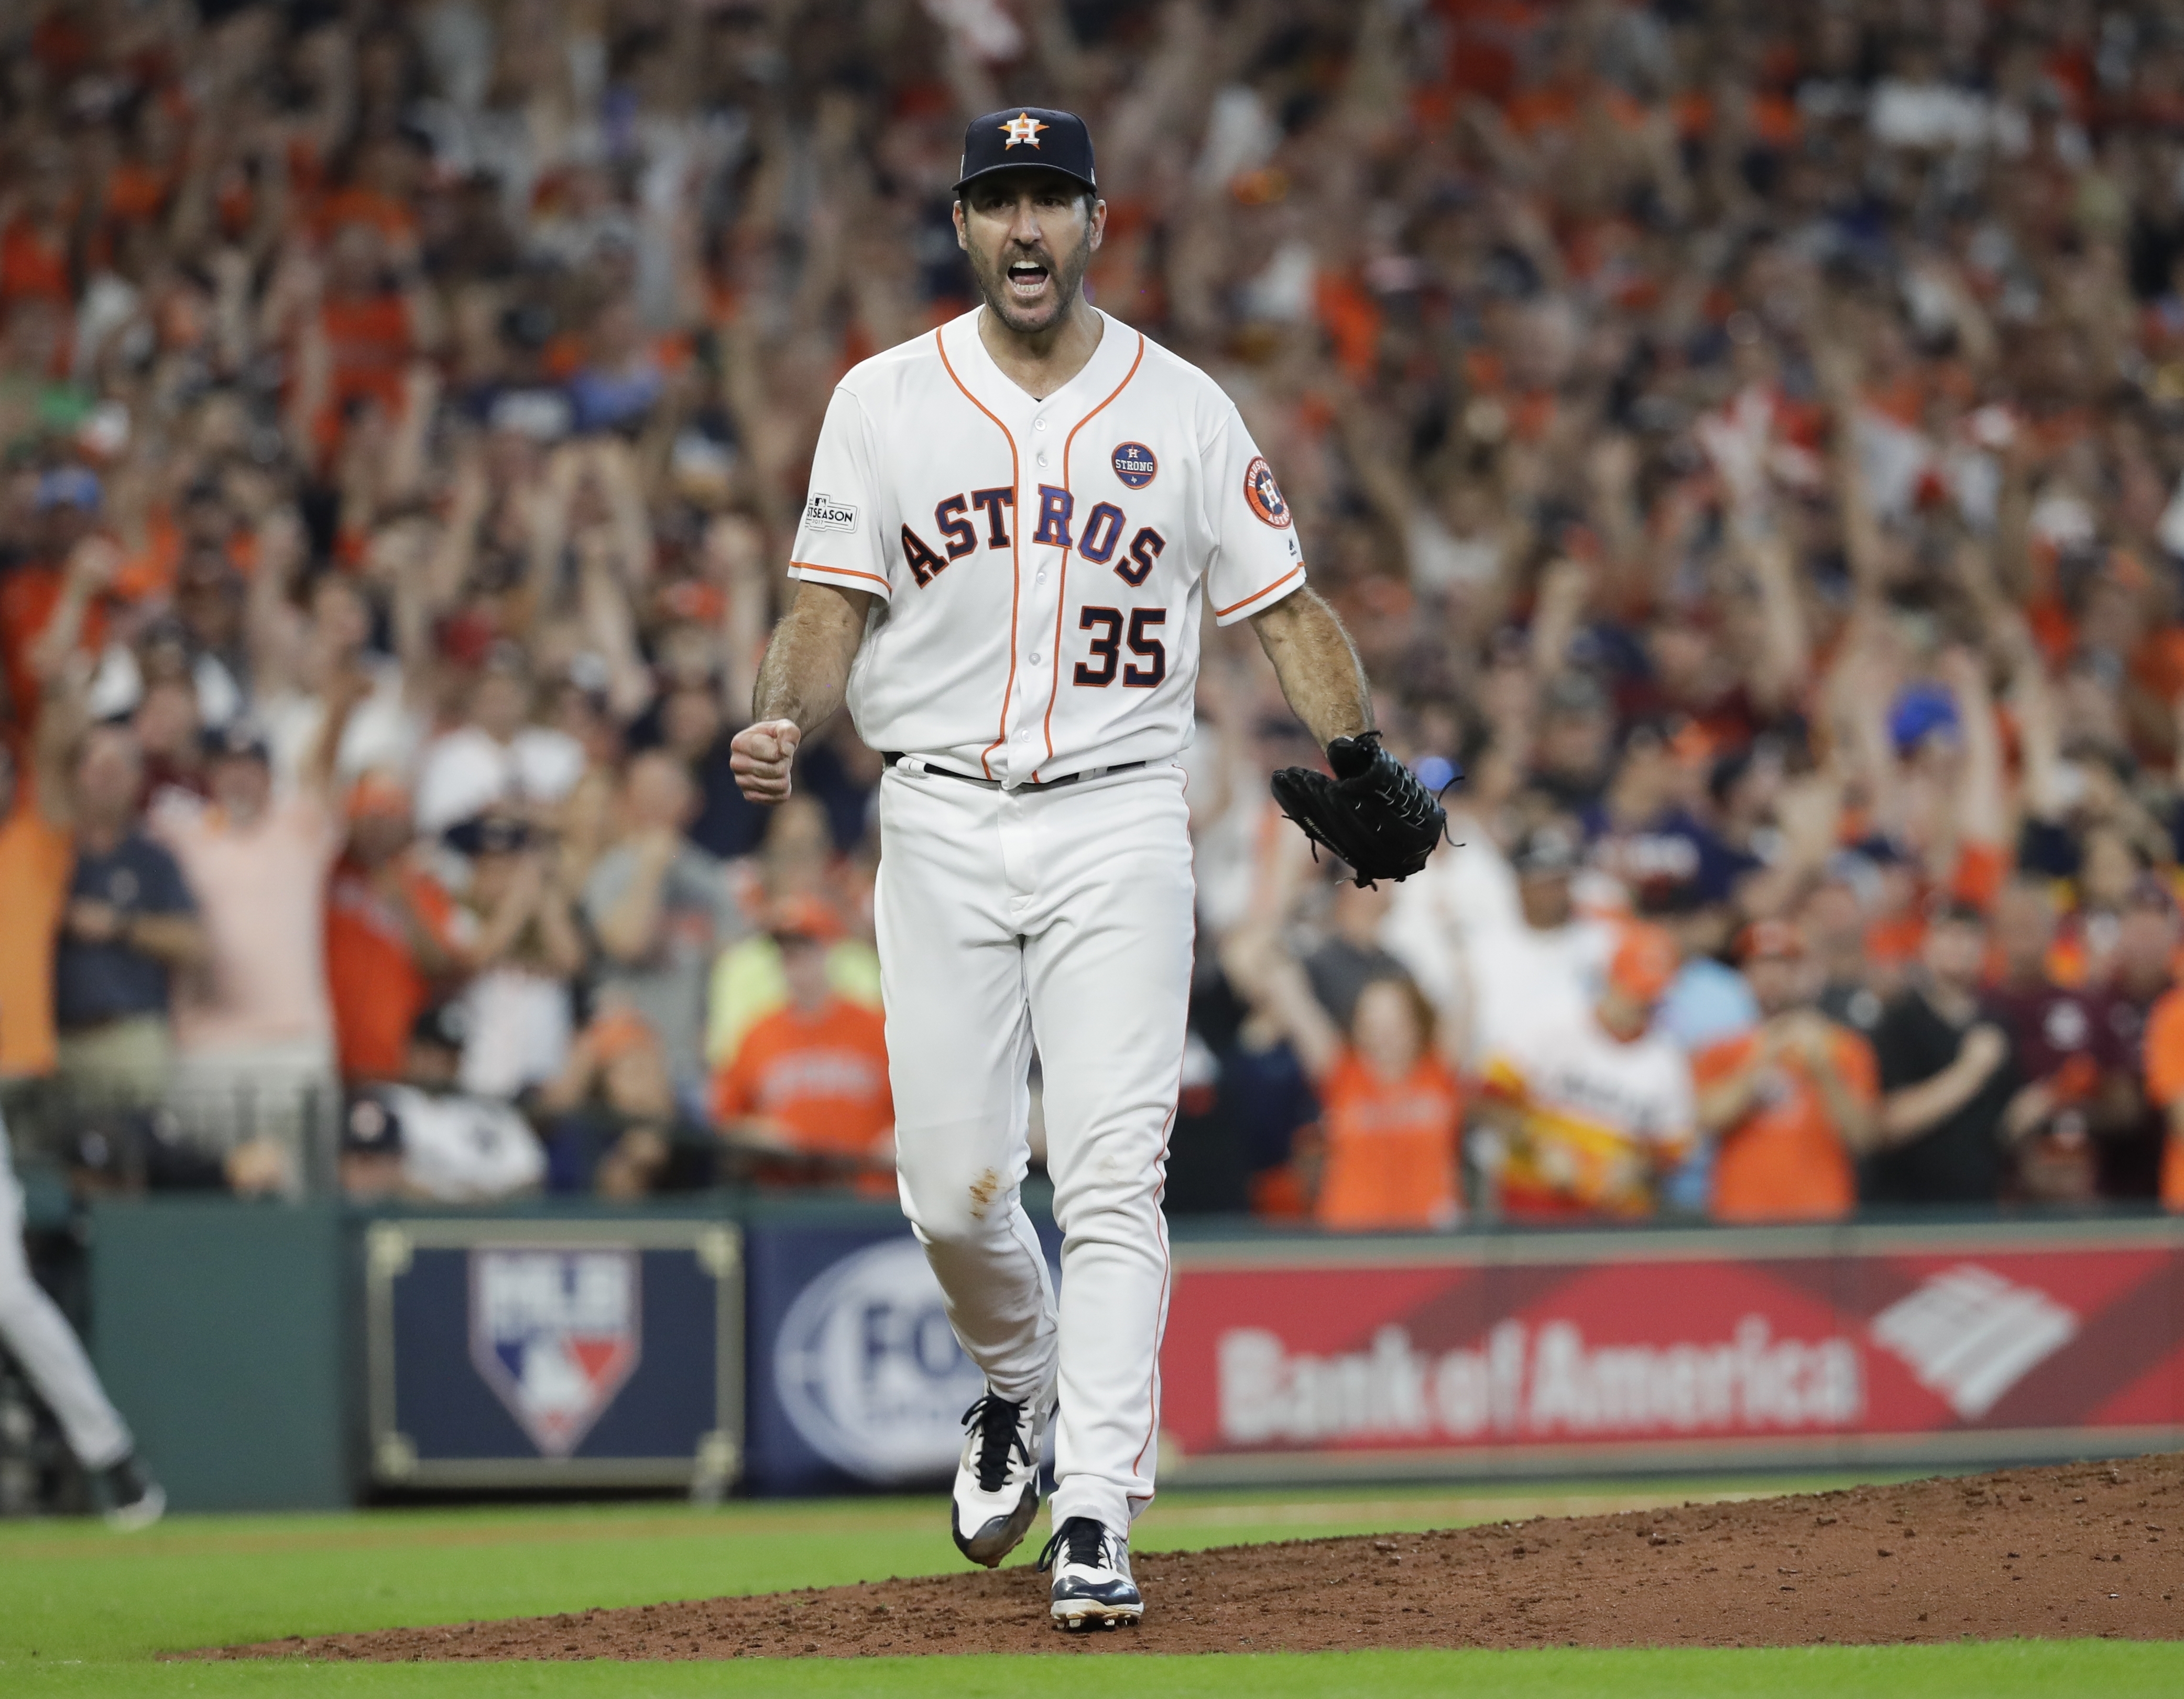 Justin Verlander recently talked about his future. Will it include